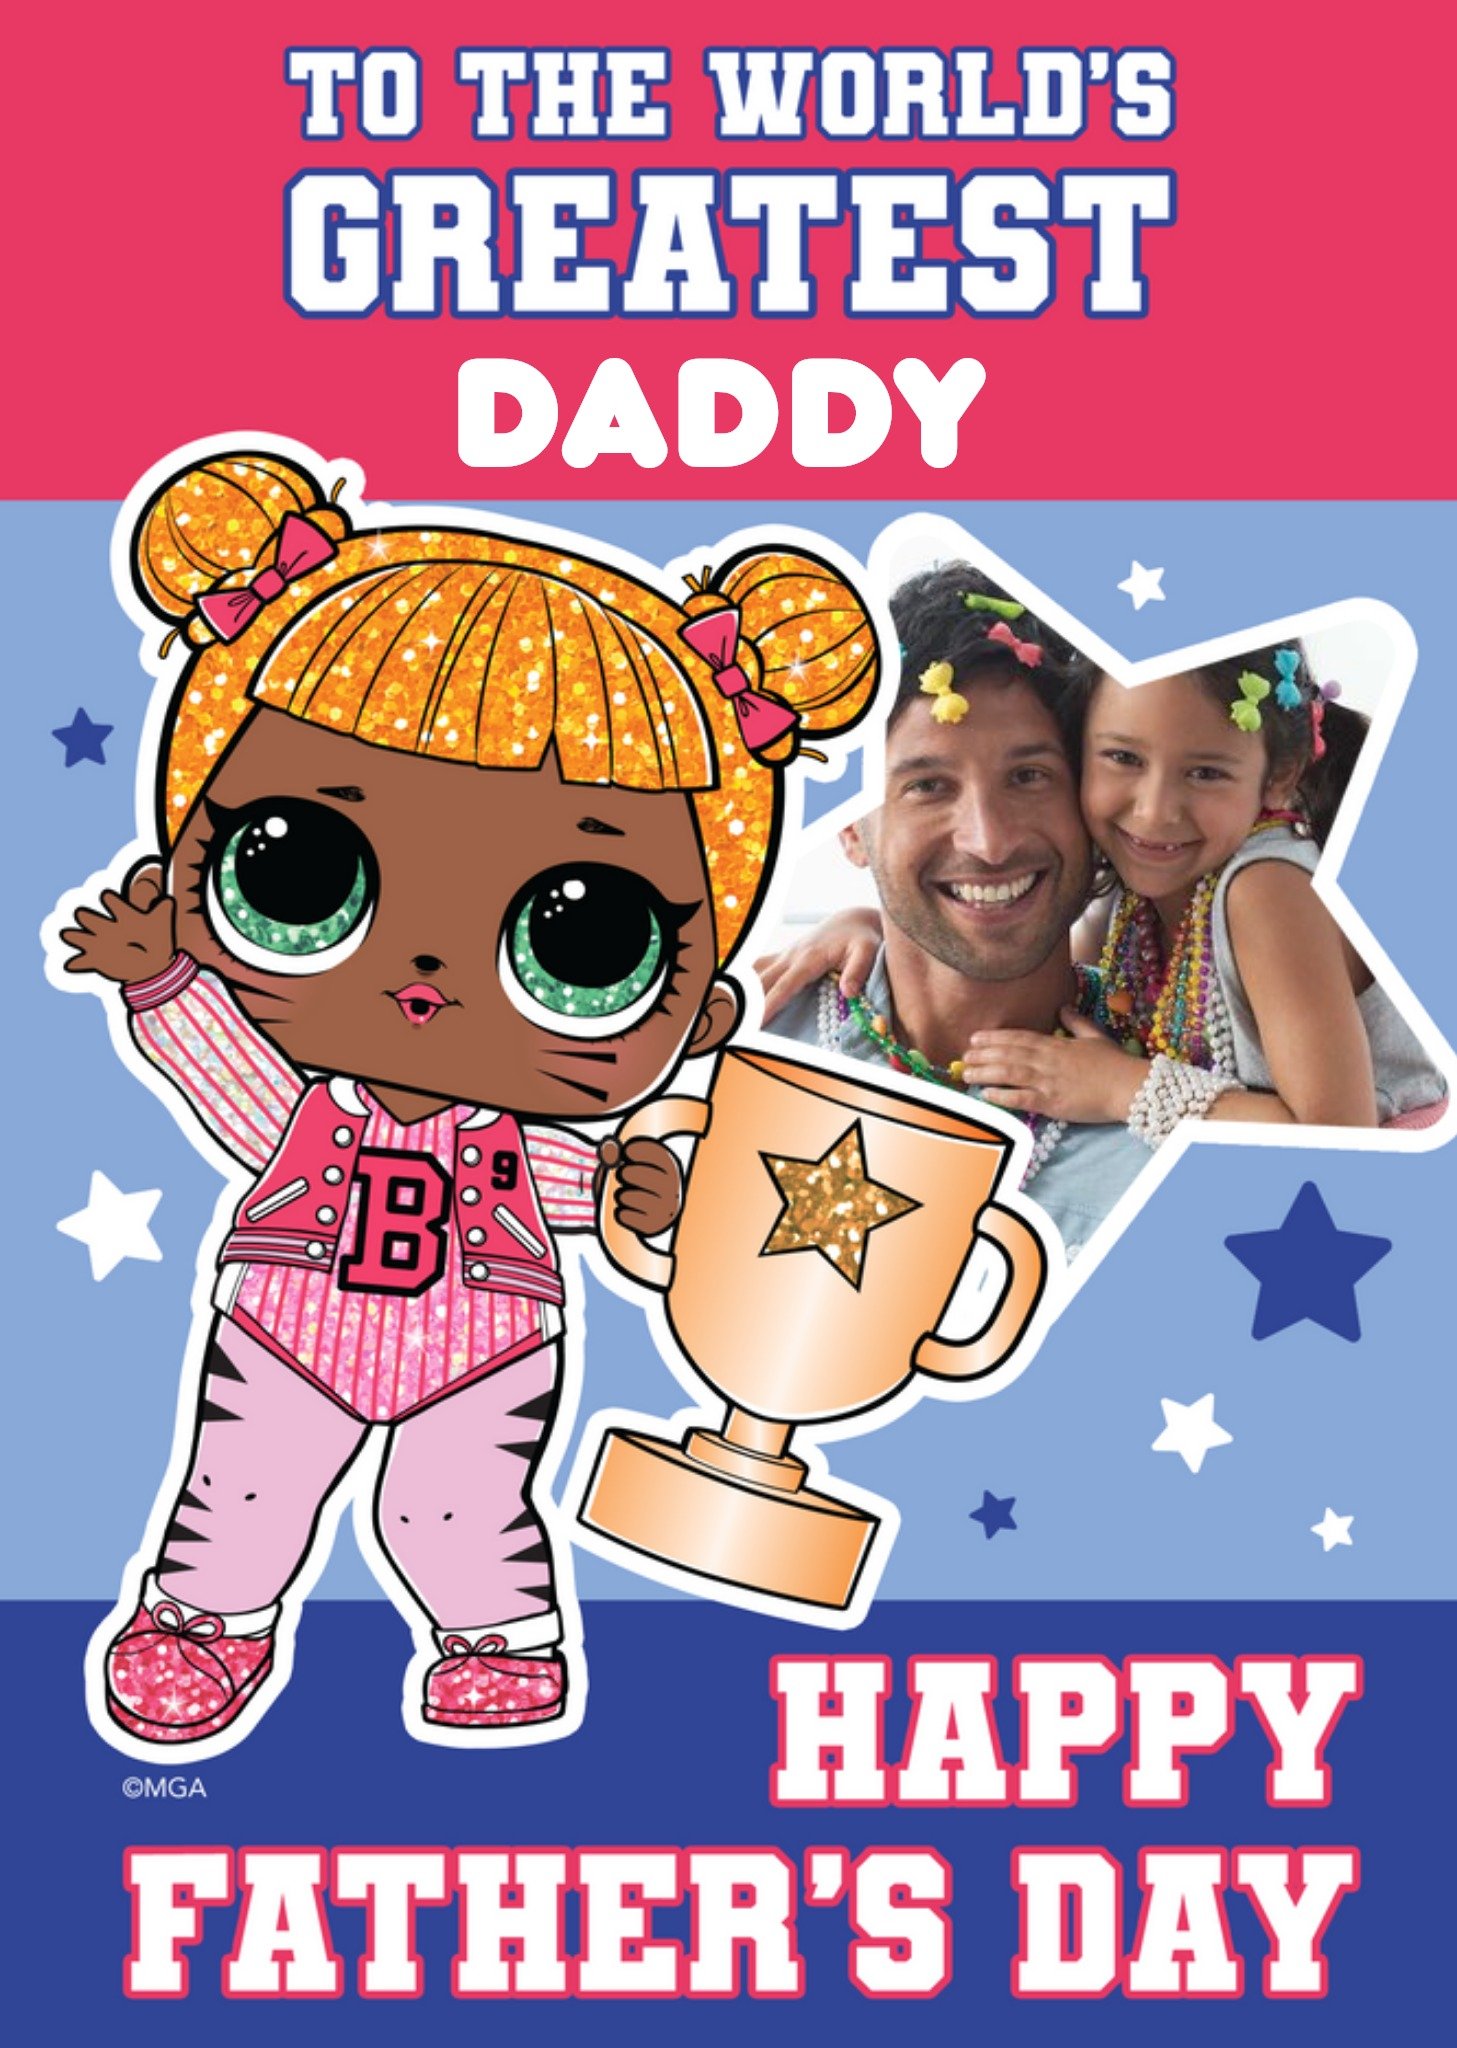 Moonpig Lol Surprise Baseball Greatest Daddy Photo Upload Father's Day Card Ecard